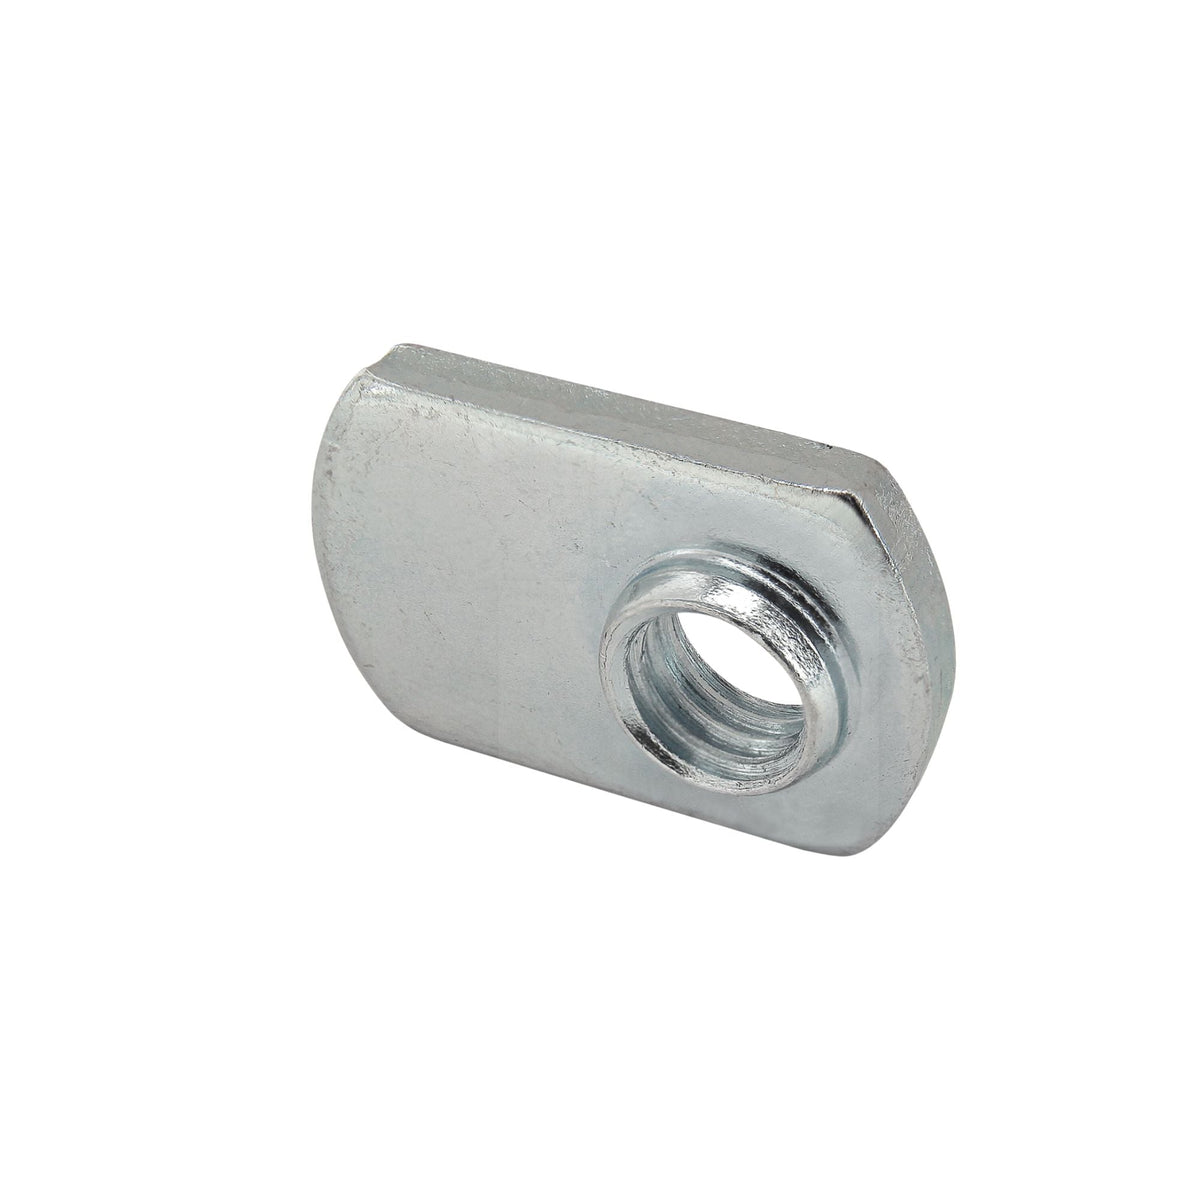 side view of a metal T-nut with mounting hole on the right